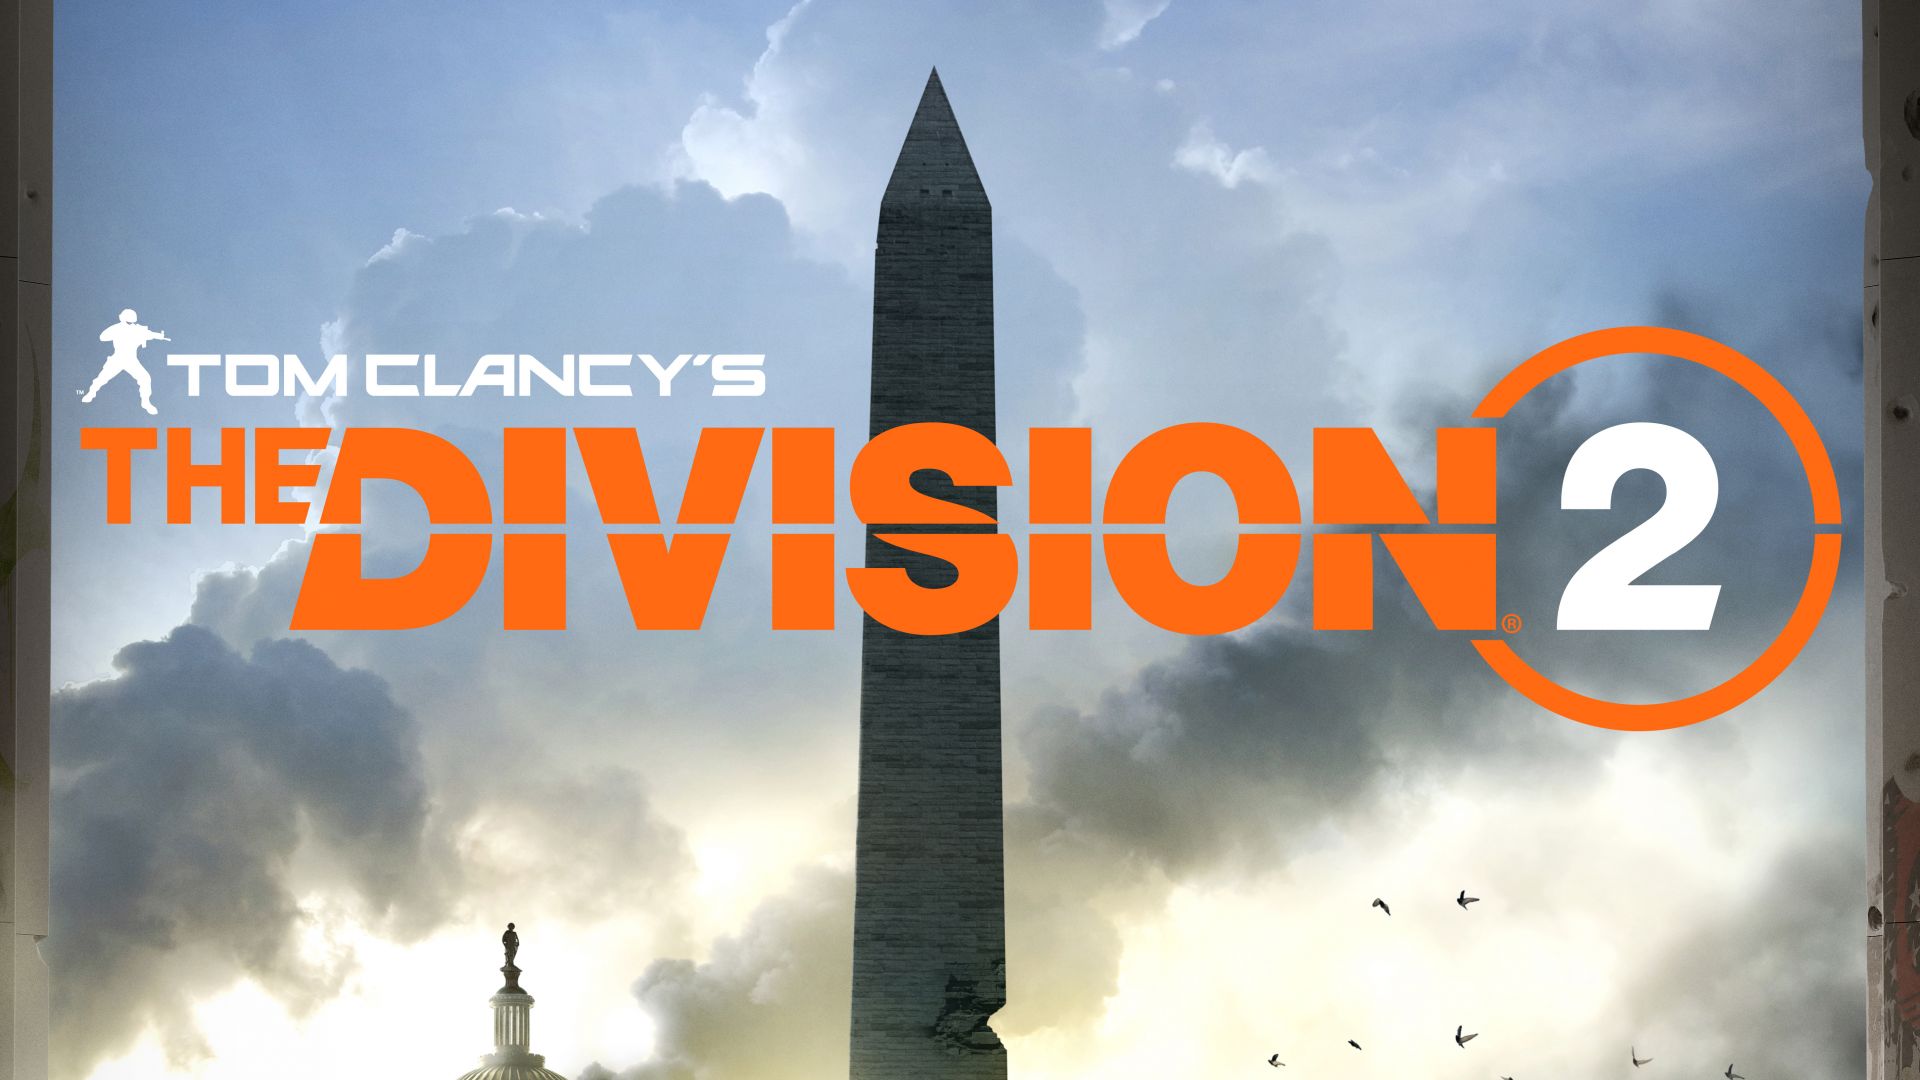 Tom Clancy's The Division 2, E3 2018, poster, 4K (horizontal)